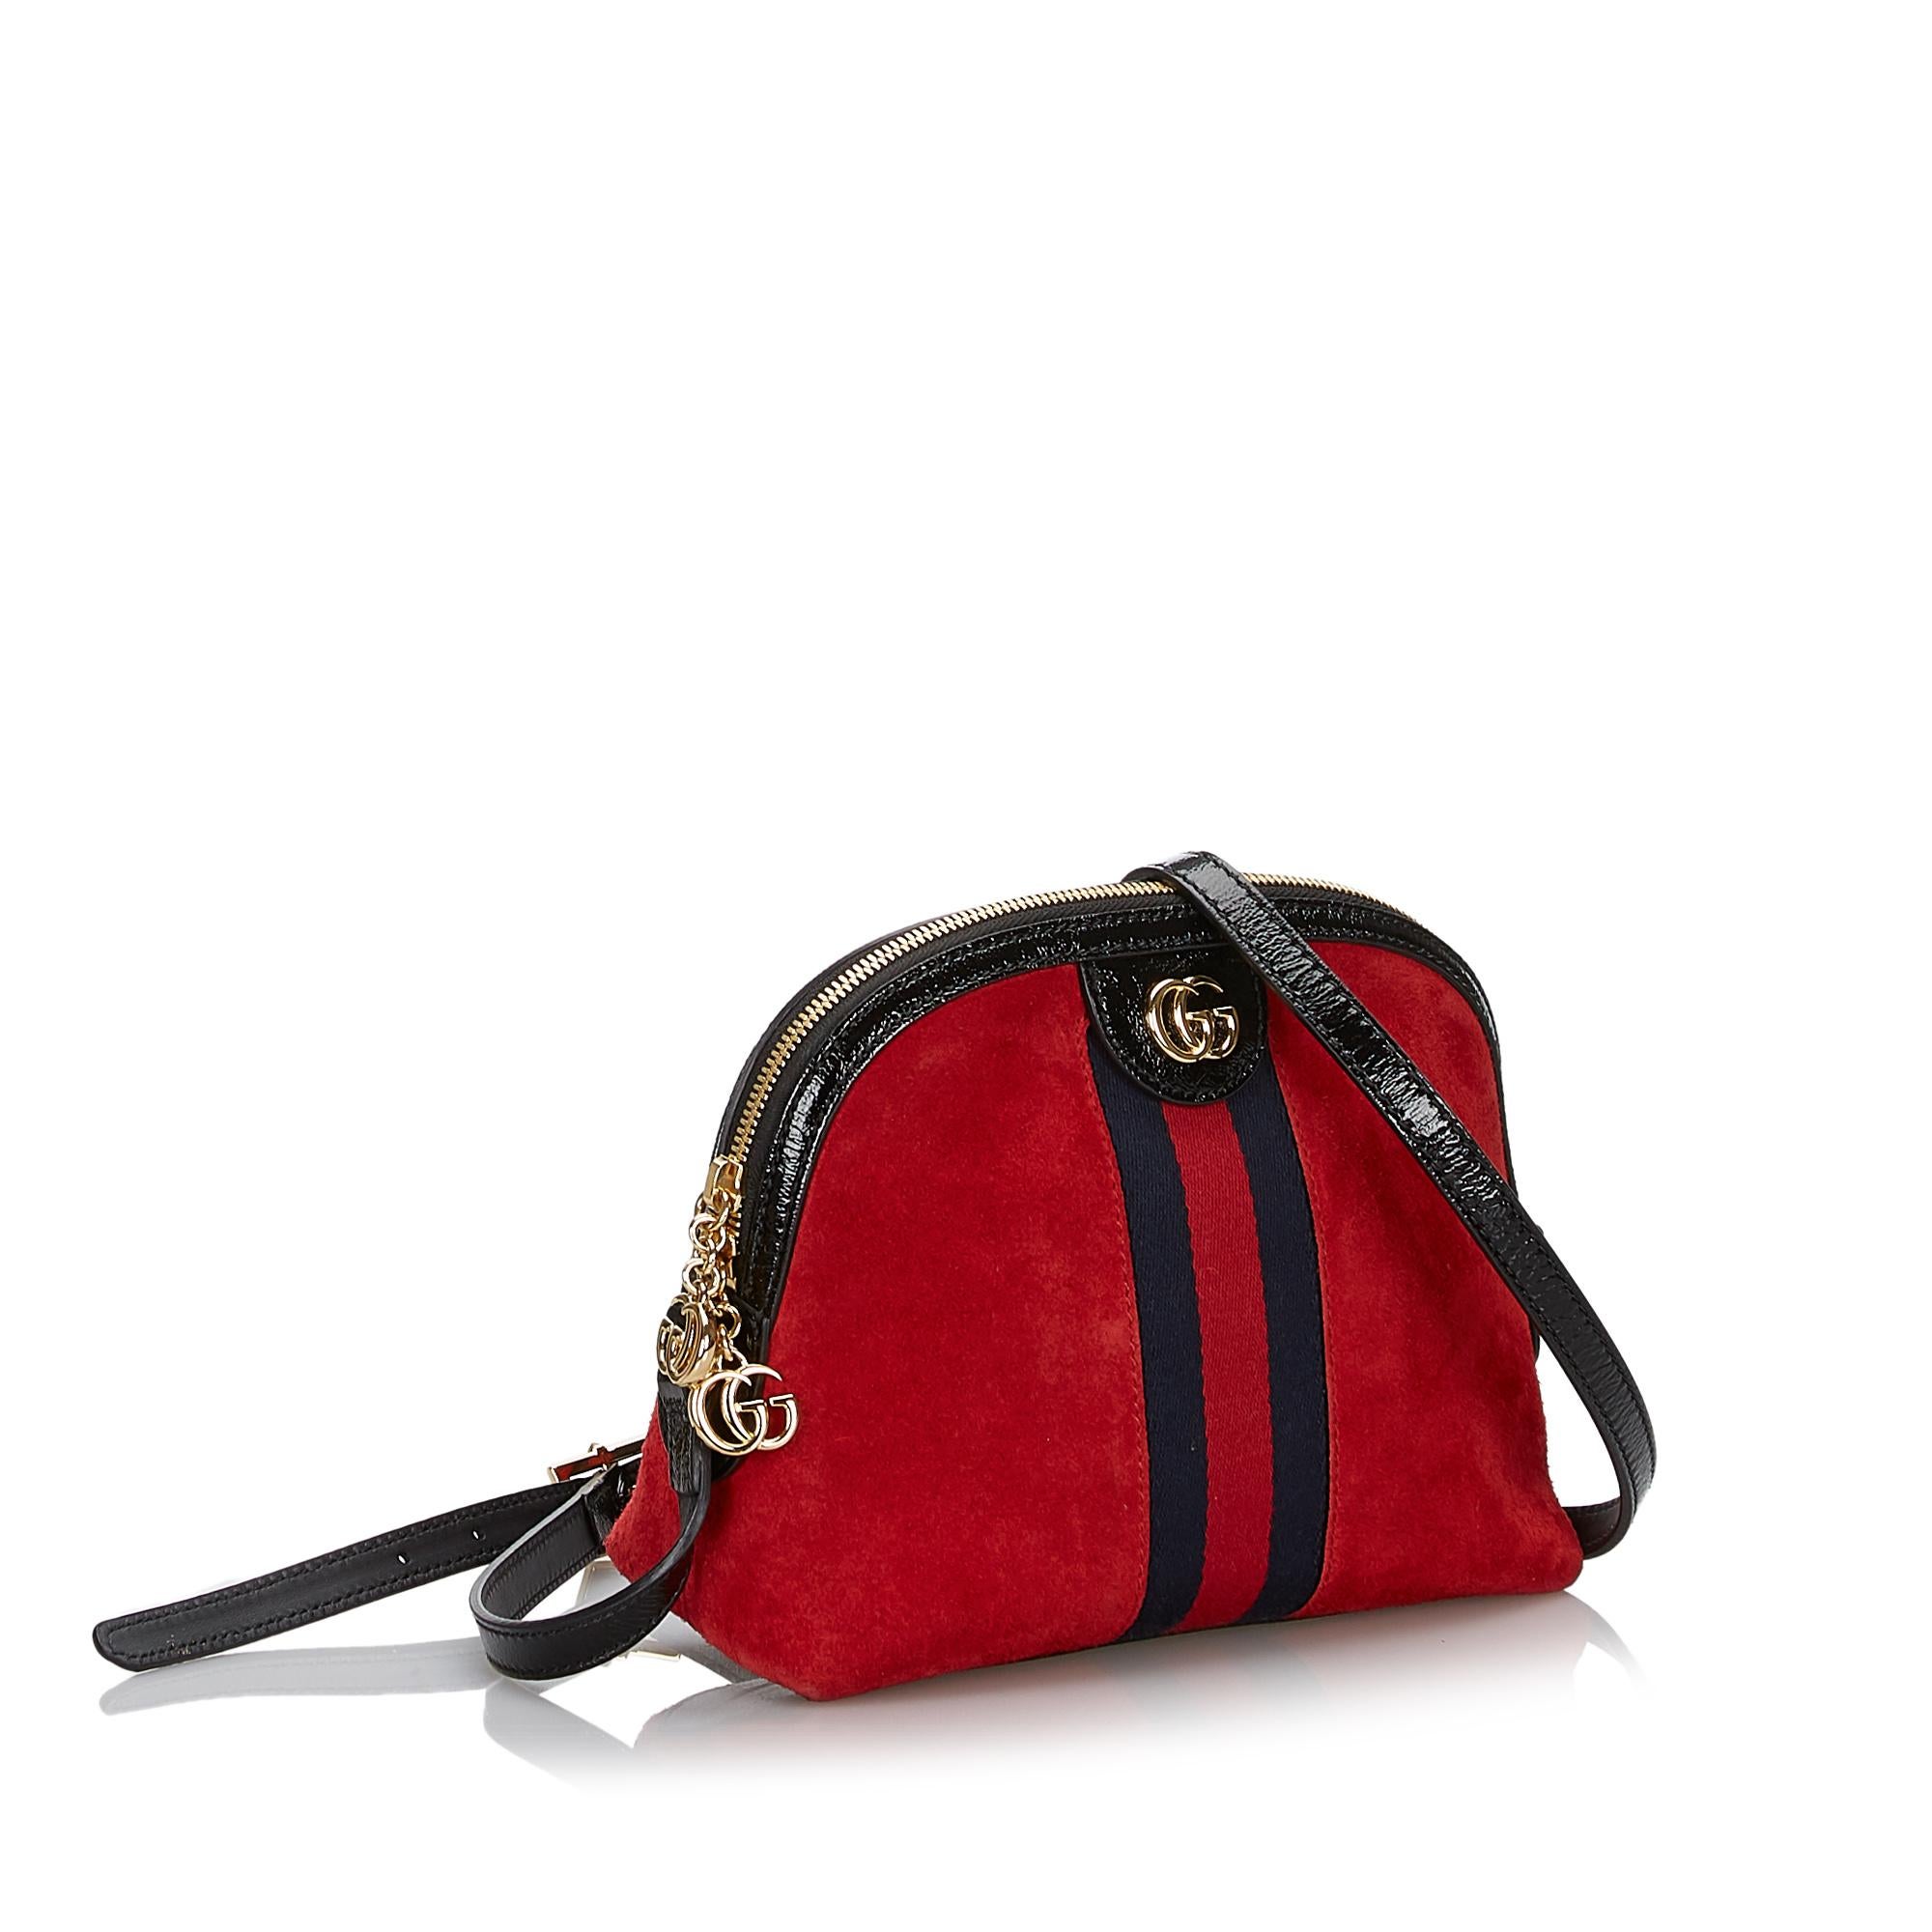 The Ophidia crossbody features a suede body, an adjustable flat leather strap, a gold-tone double G 2way top zip closure, and interior slip pockets. It carries as AB condition rating.

Inclusions: 
This item does not come with